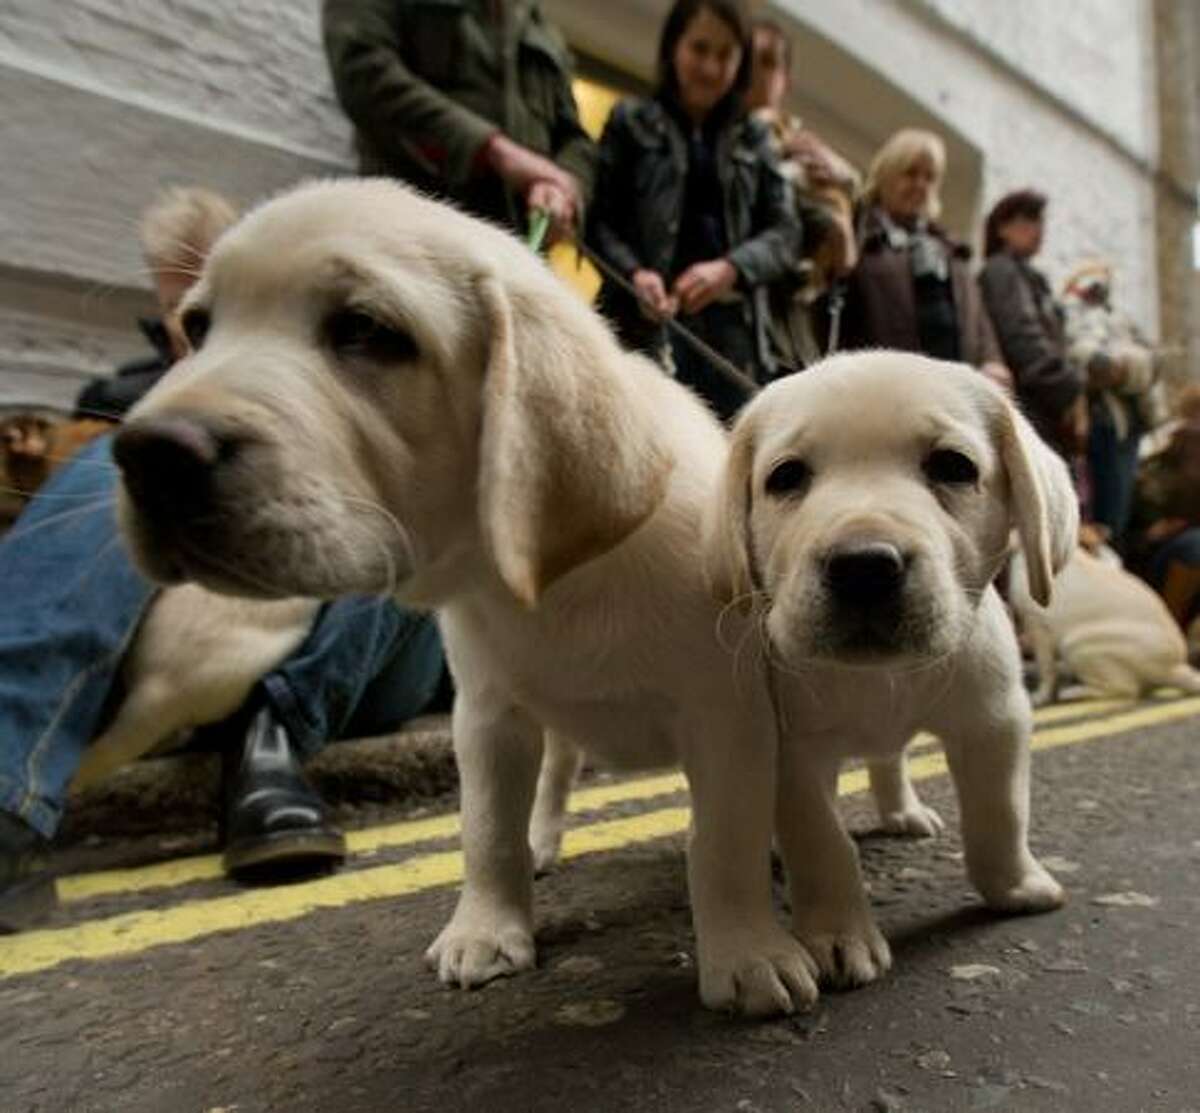 Puppies wait to audition for the new Andrex toilet roll commercial at Pineapple Studios on November 17, 2010 in London, England.